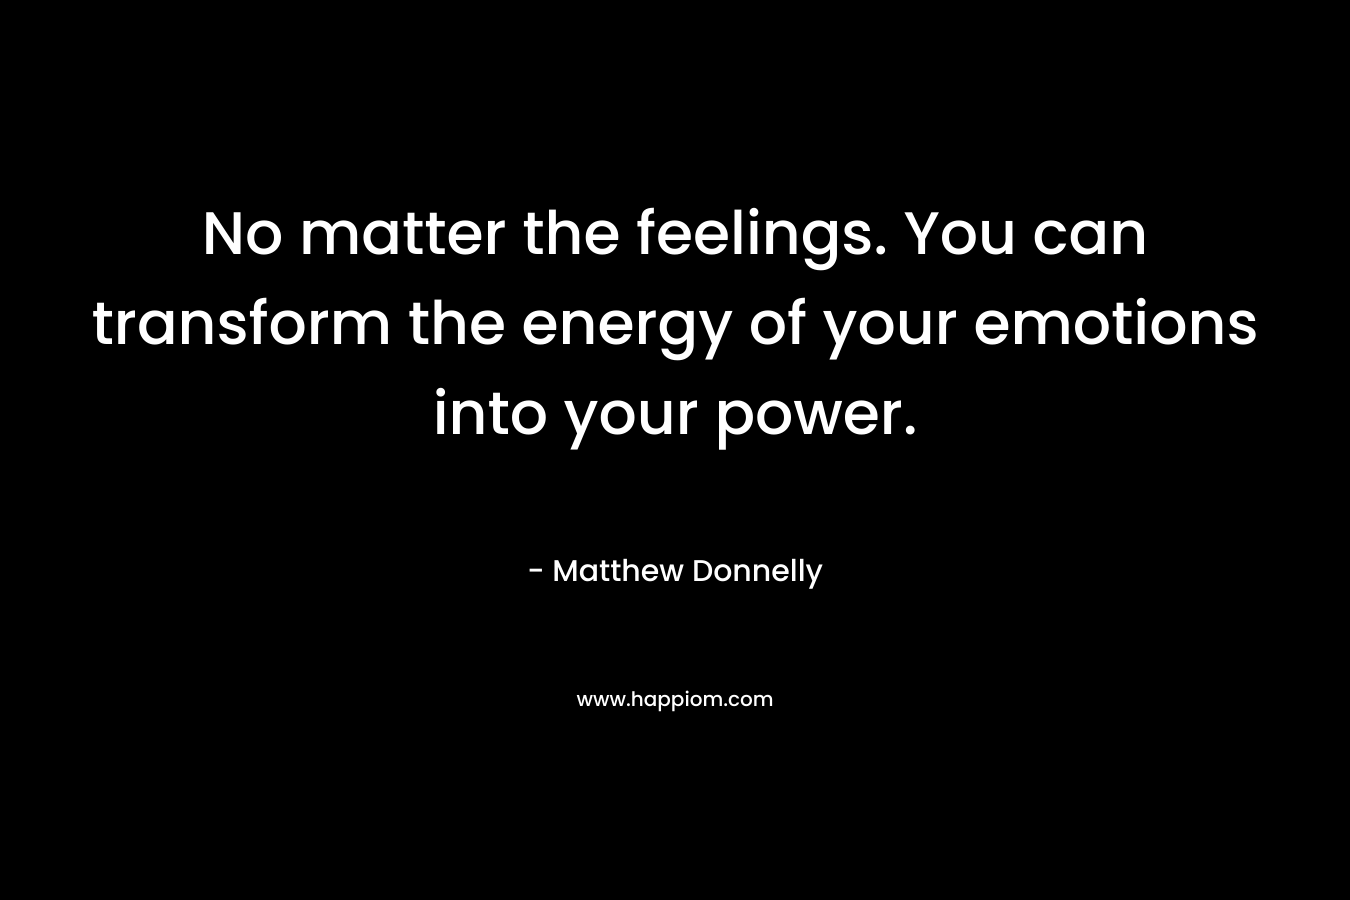 No matter the feelings. You can transform the energy of your emotions into your power.